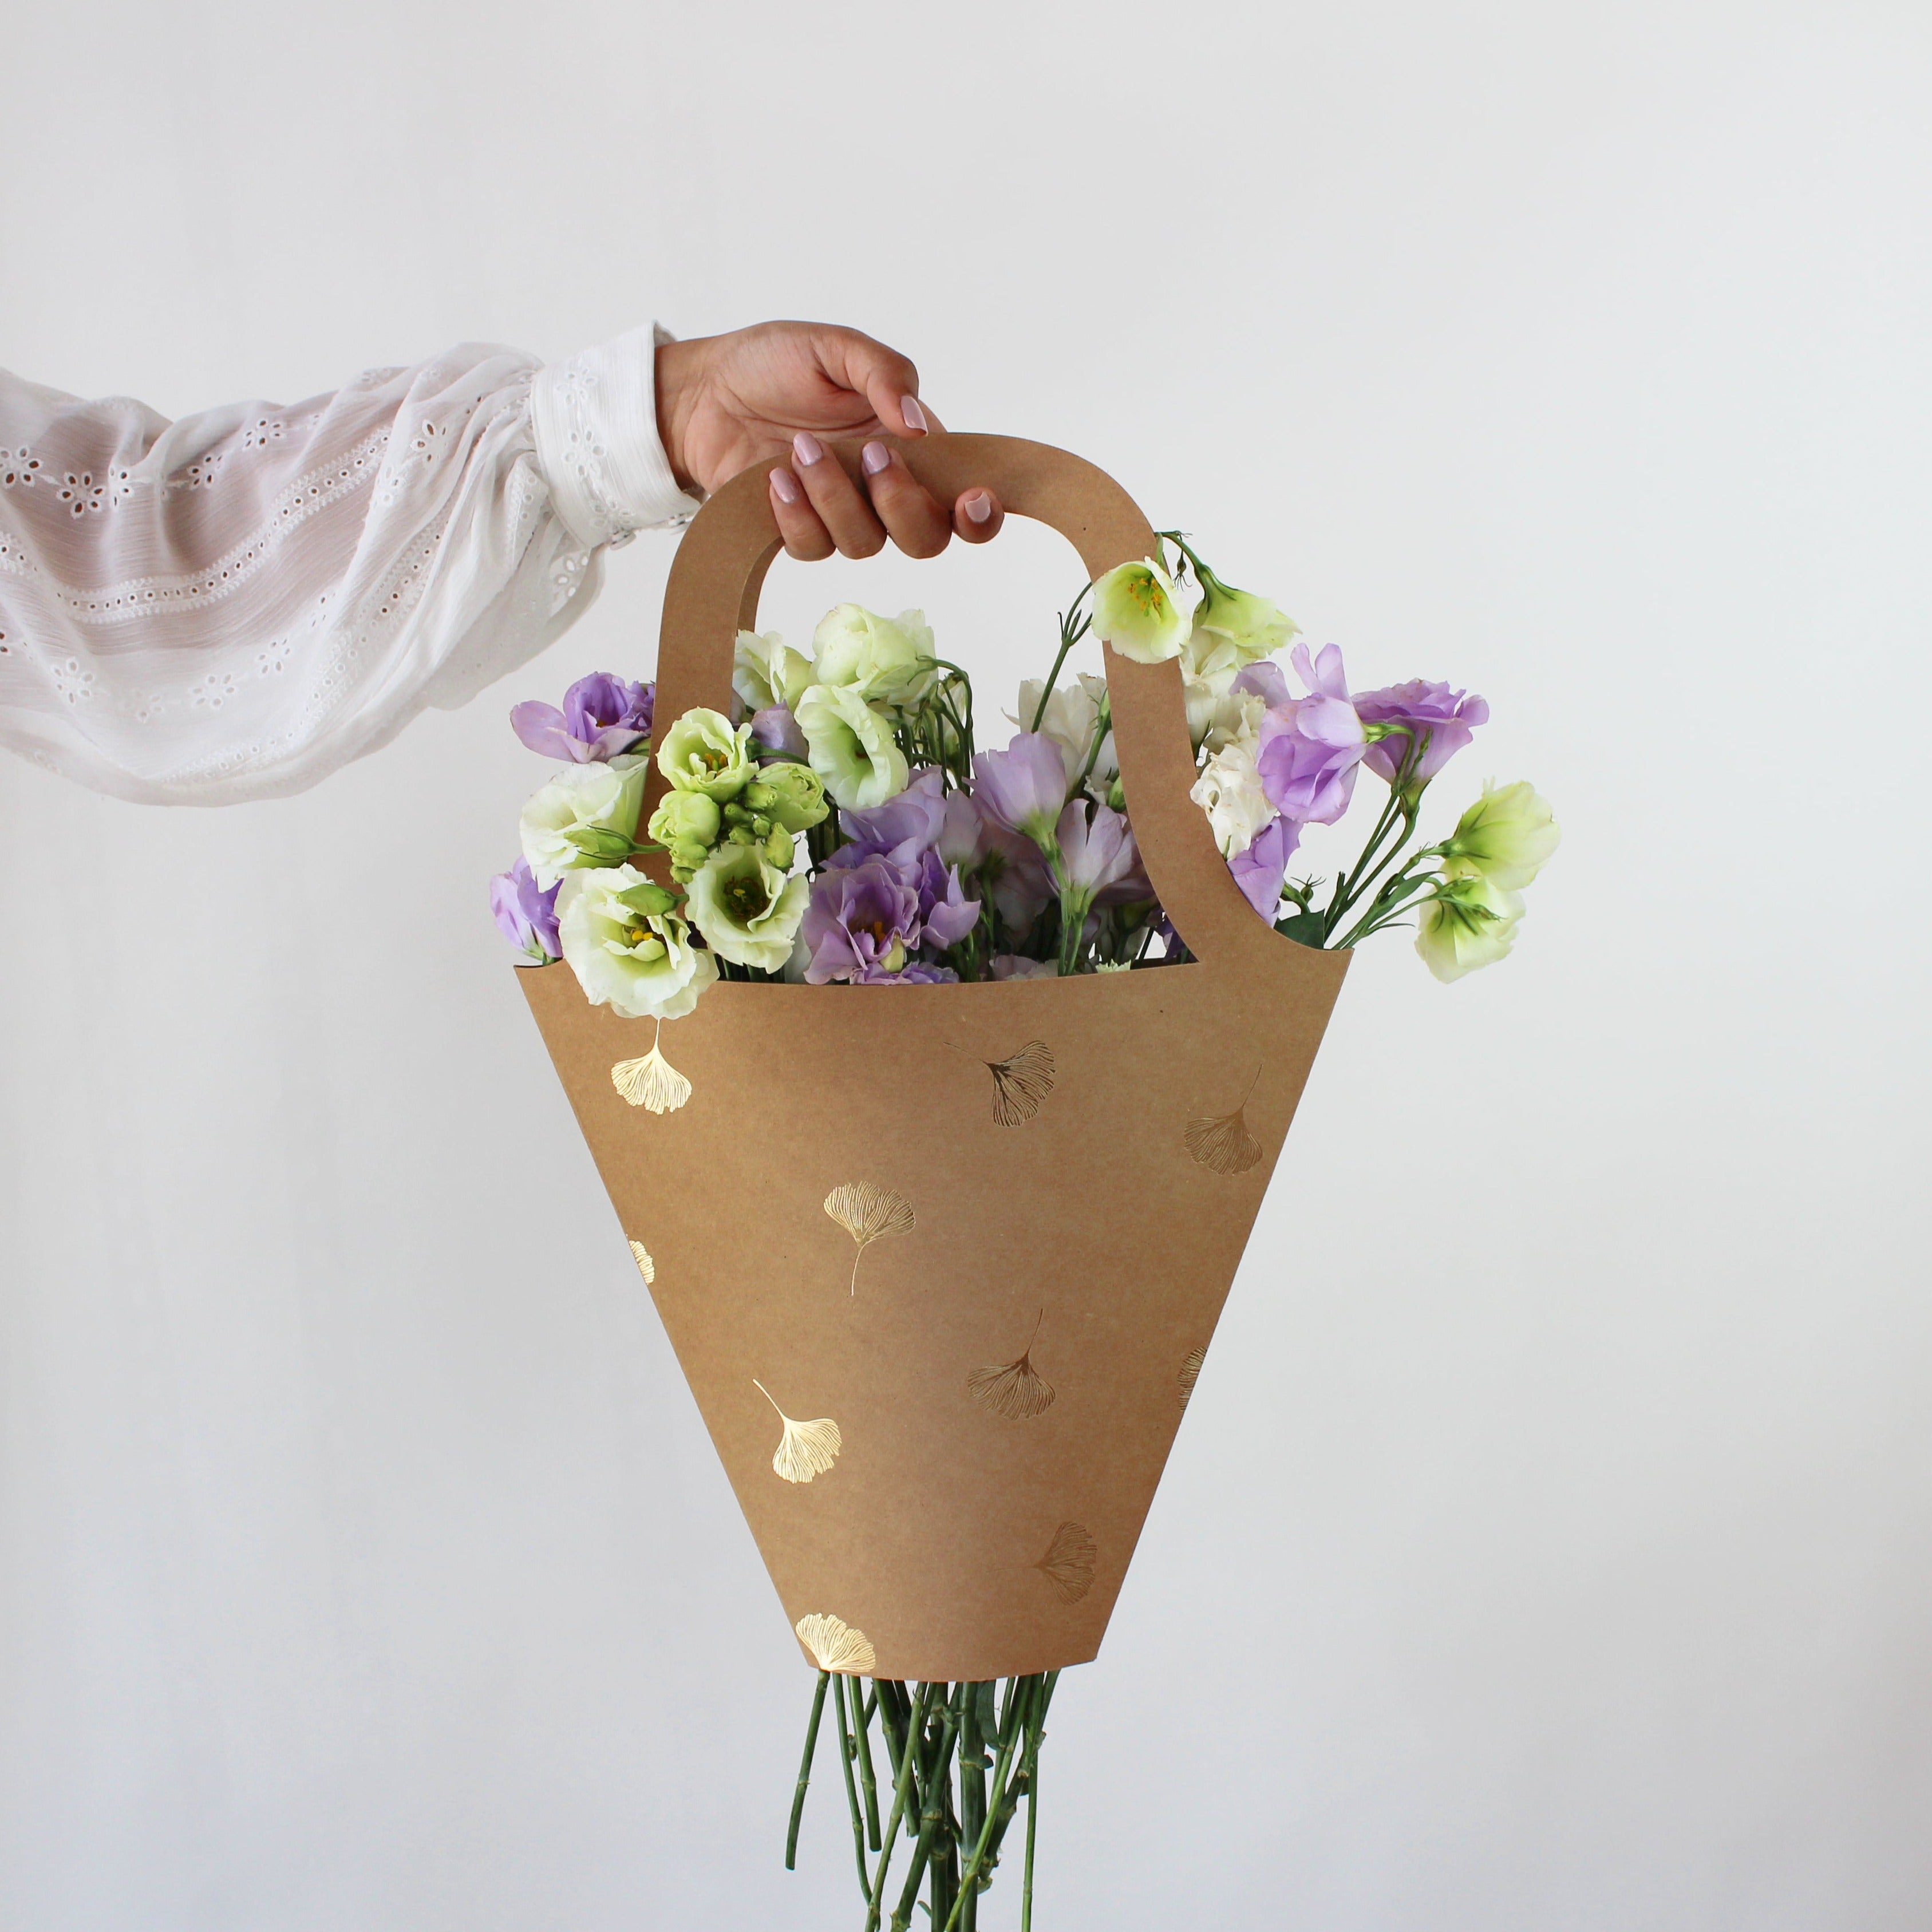 DIY PUFF FLOWER BAG | Gallery posted by Michelle | Lemon8